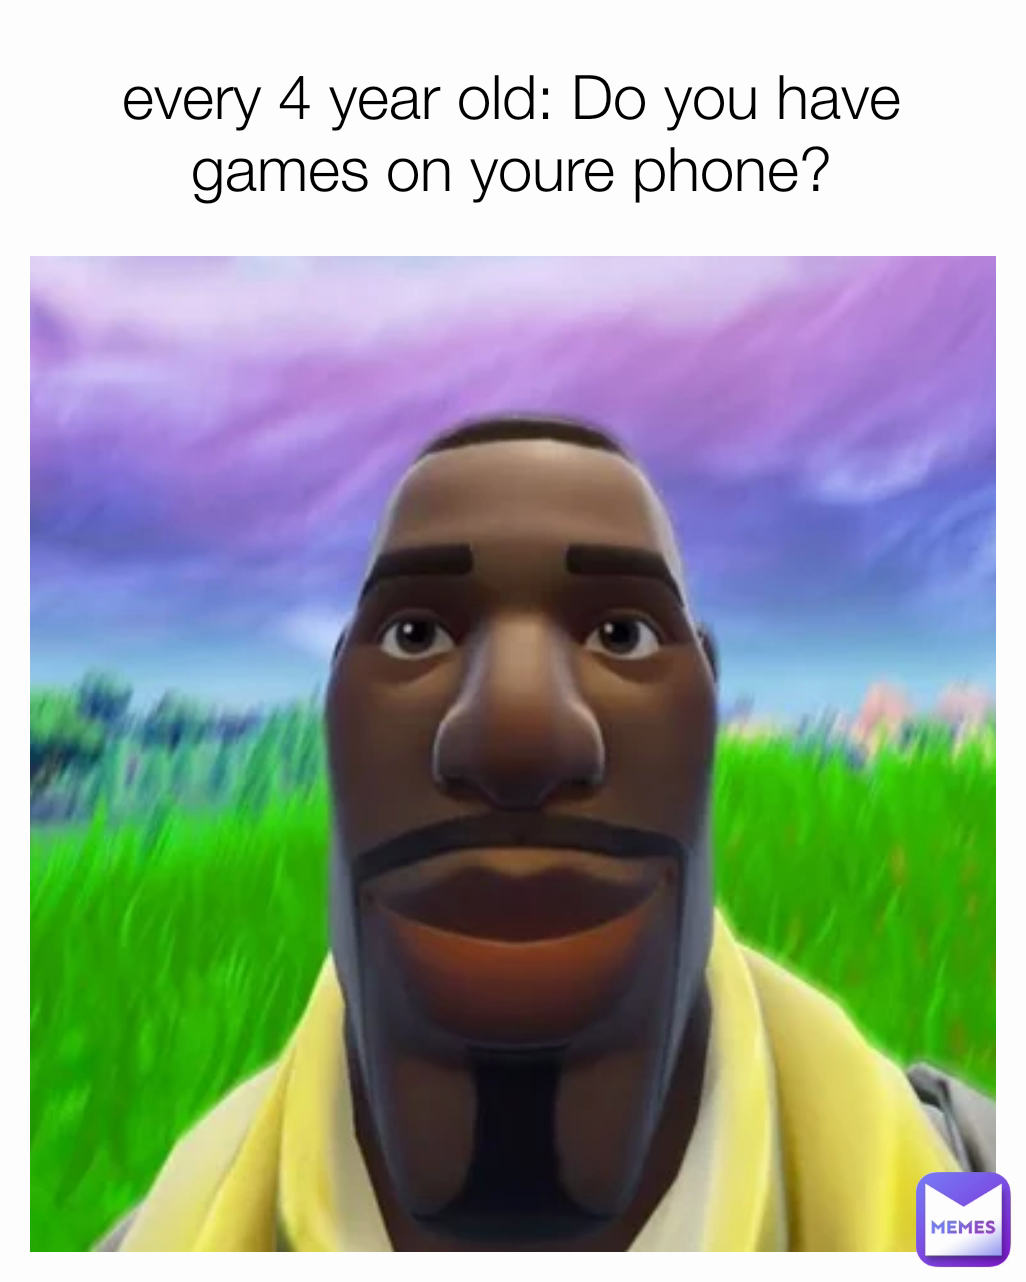 every 4 year old: Do you have games on youre phone?